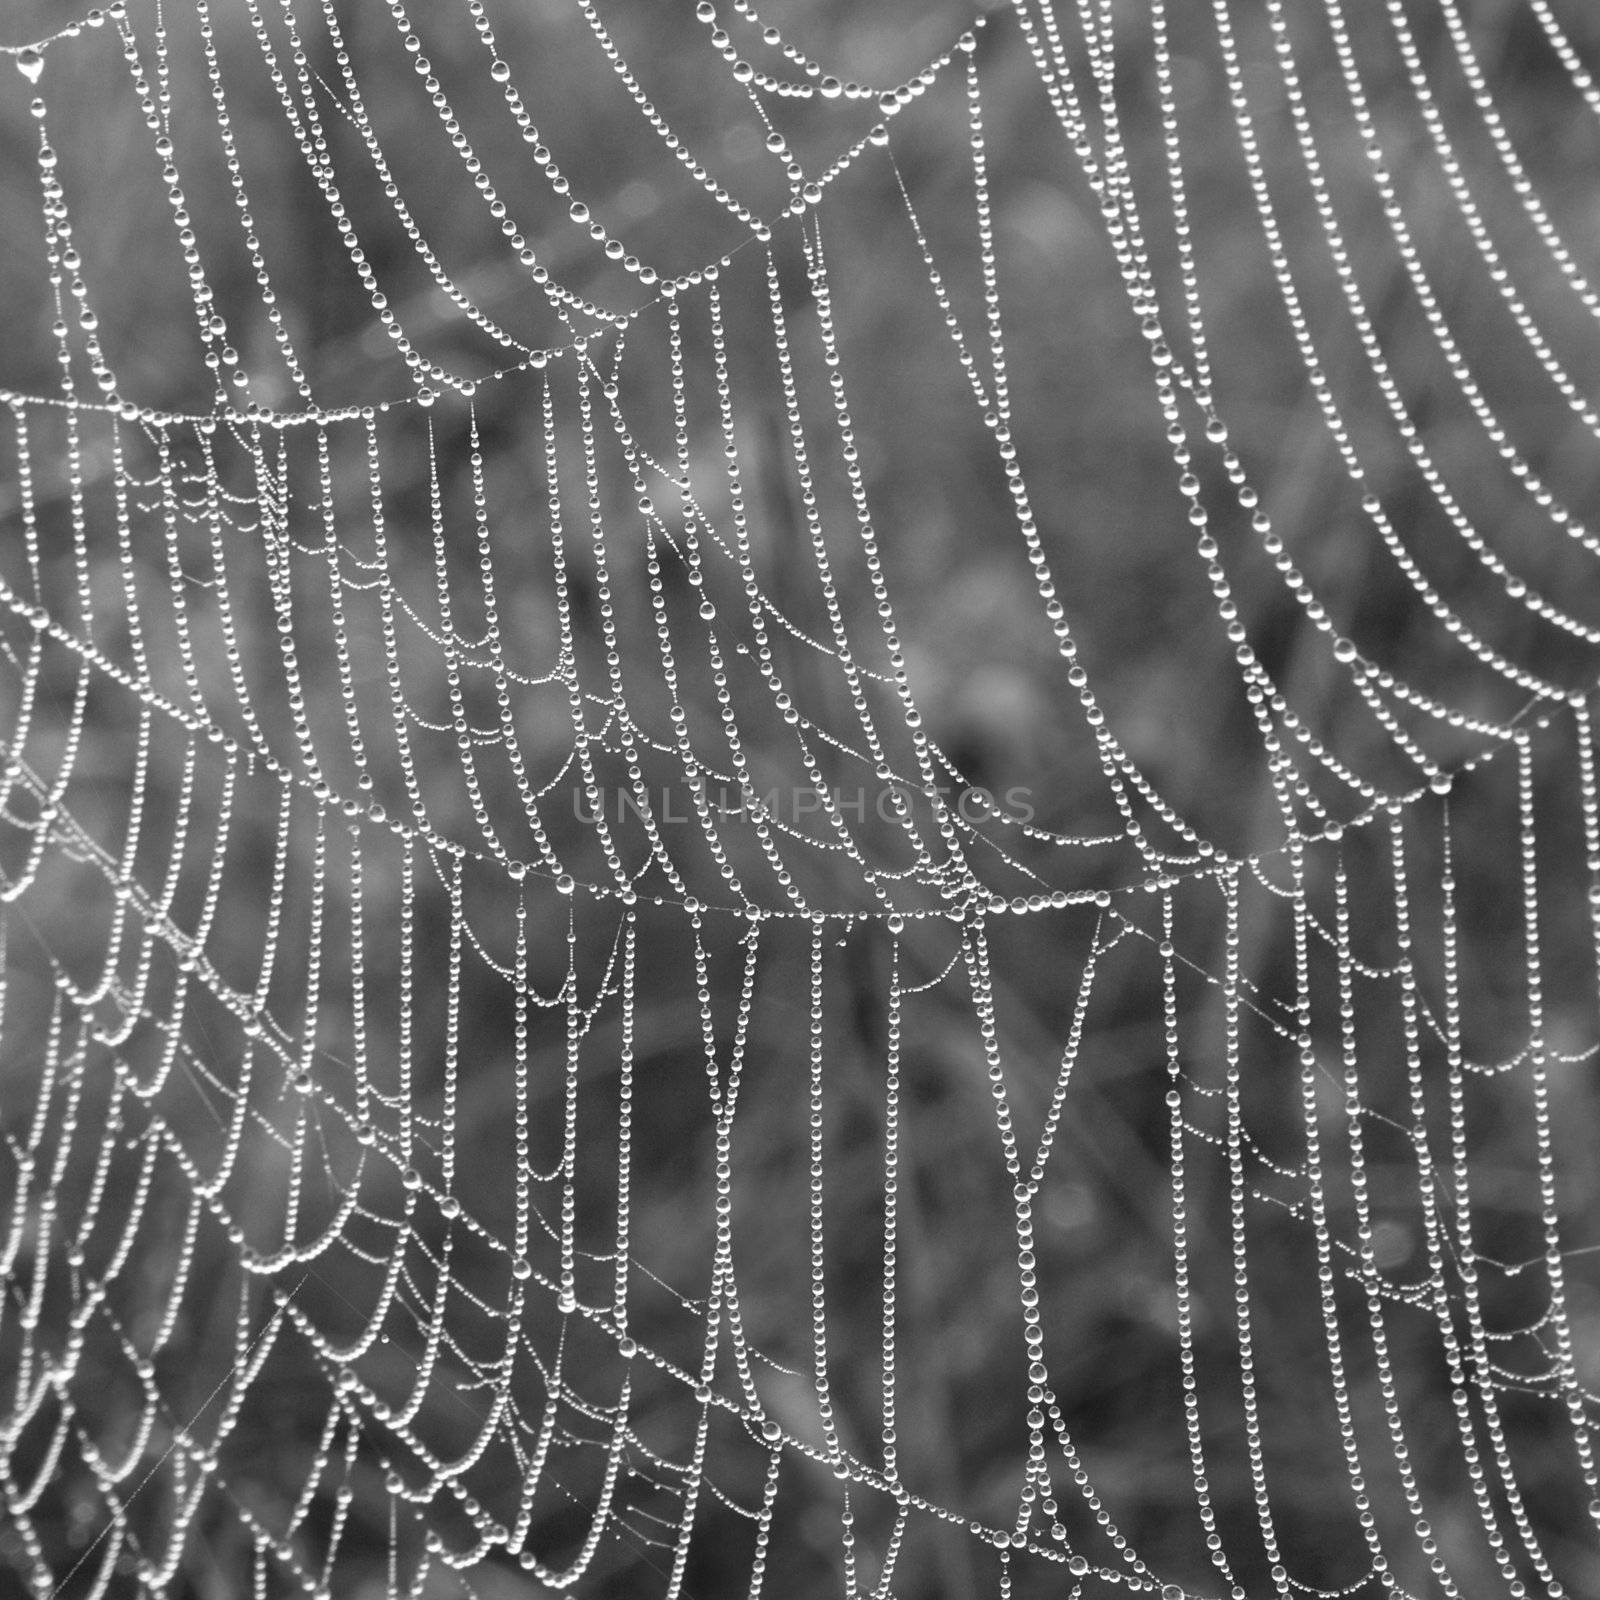 spider web with water drops black and white image by Alekcey